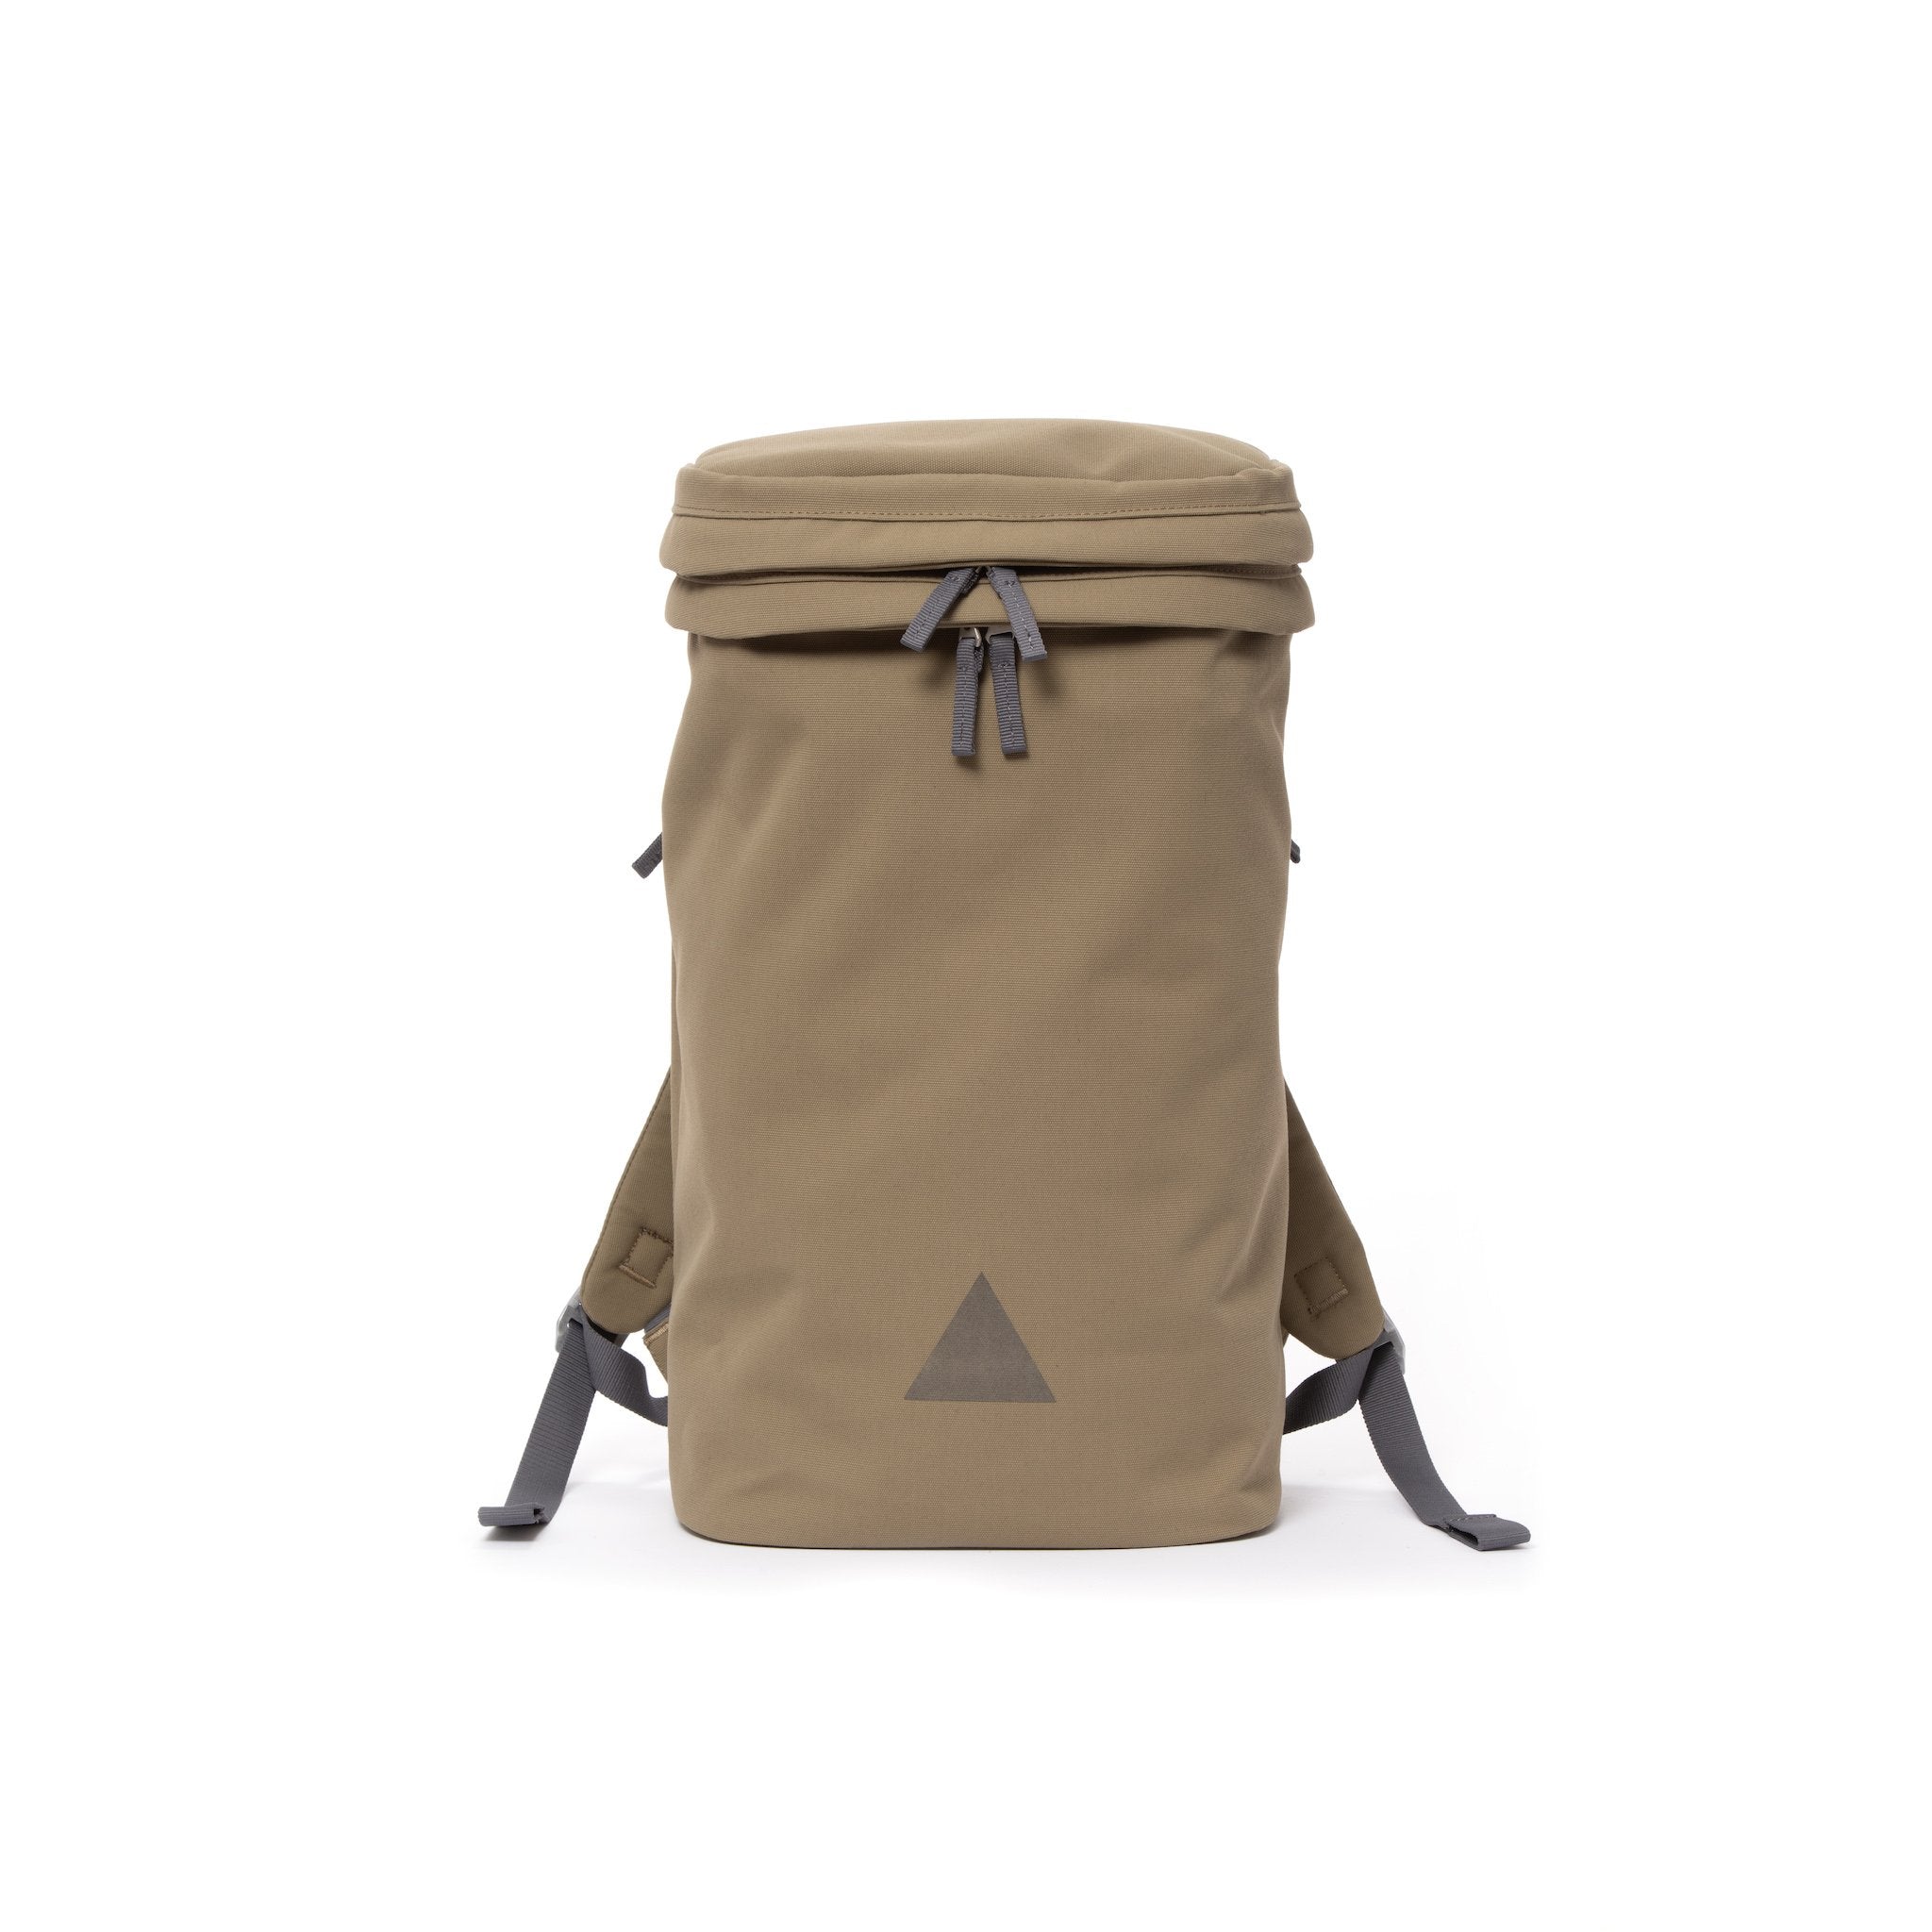 Khaki canvas backpack with zip opening, padded shoulder straps and triangle logo.